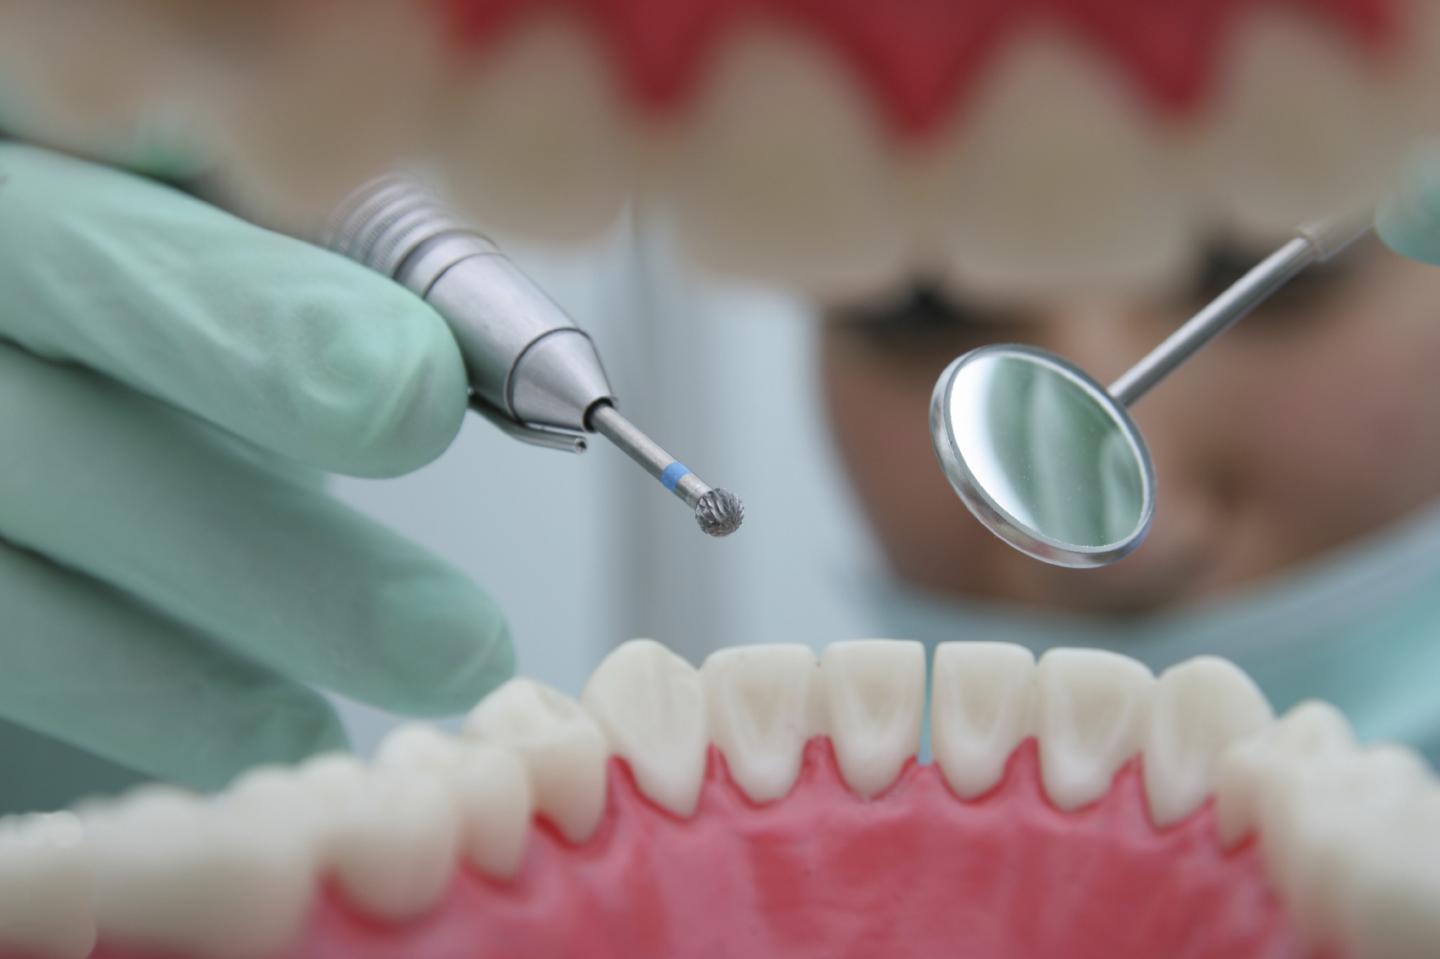 Why Do Some People Have Spots in Their Teeth from Fluoride?